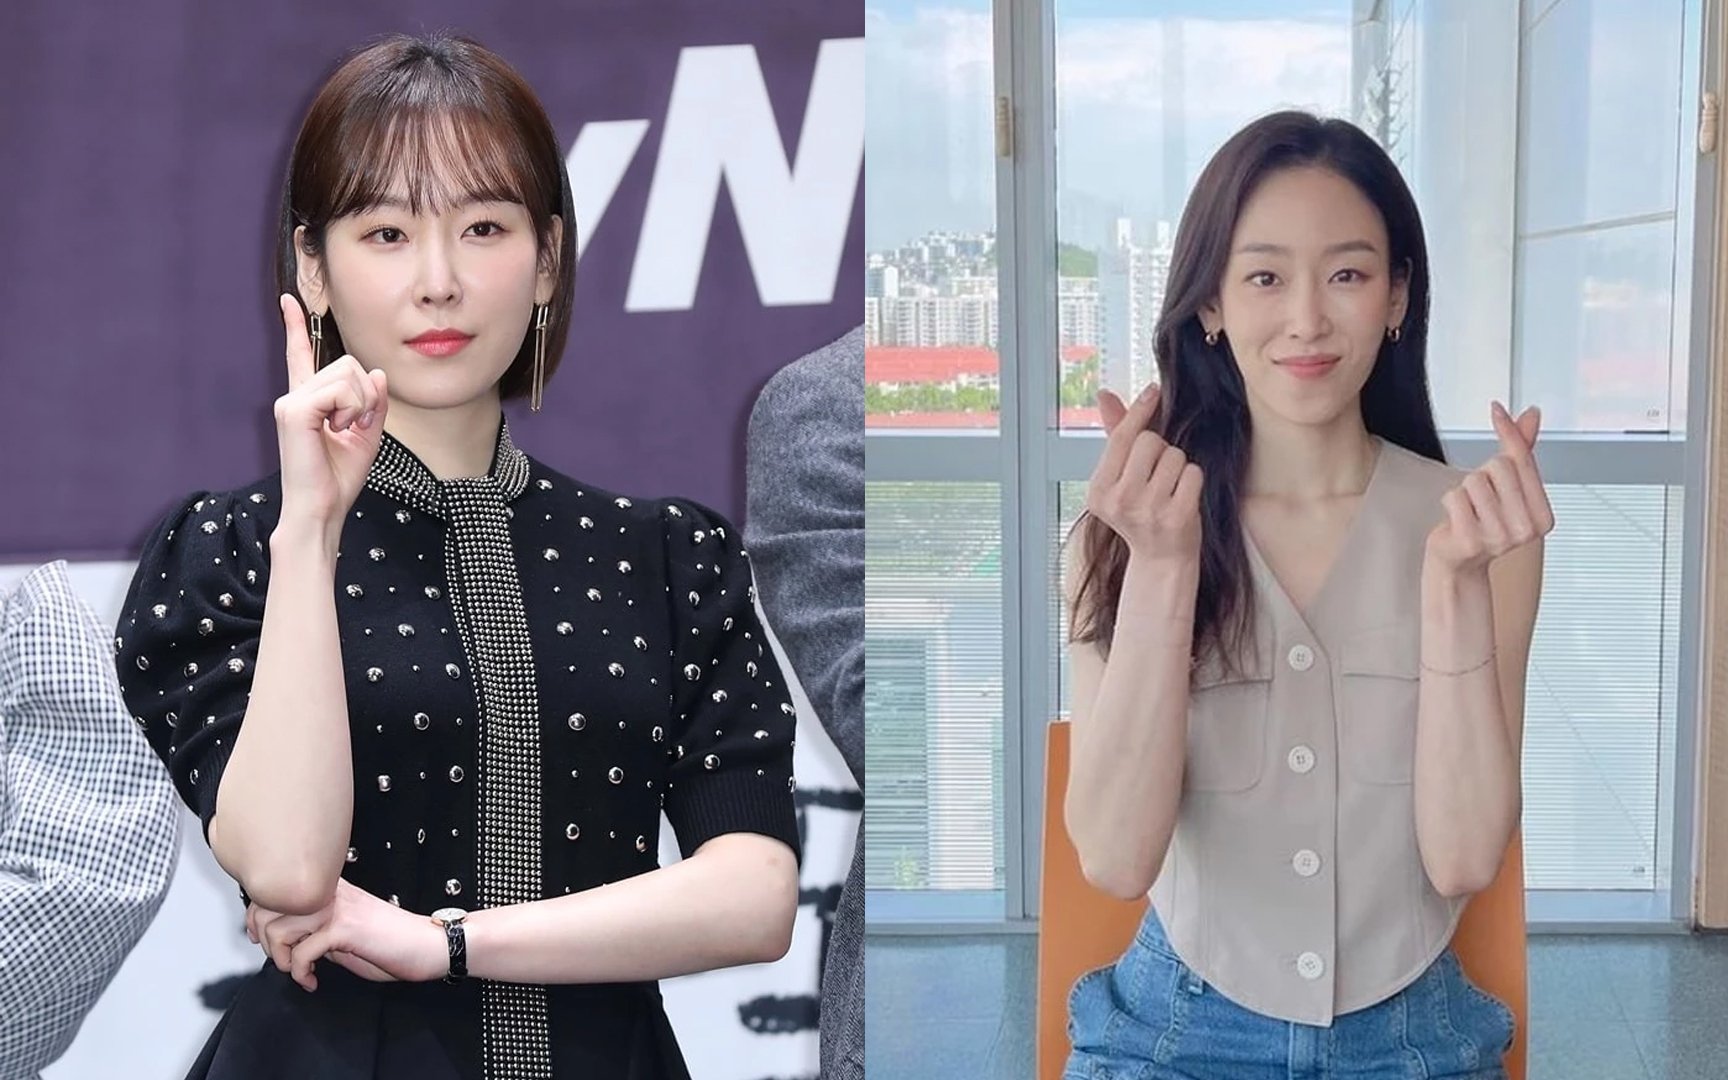 Actress seo hyun jin worries fans with her recent photos looking extremely thin